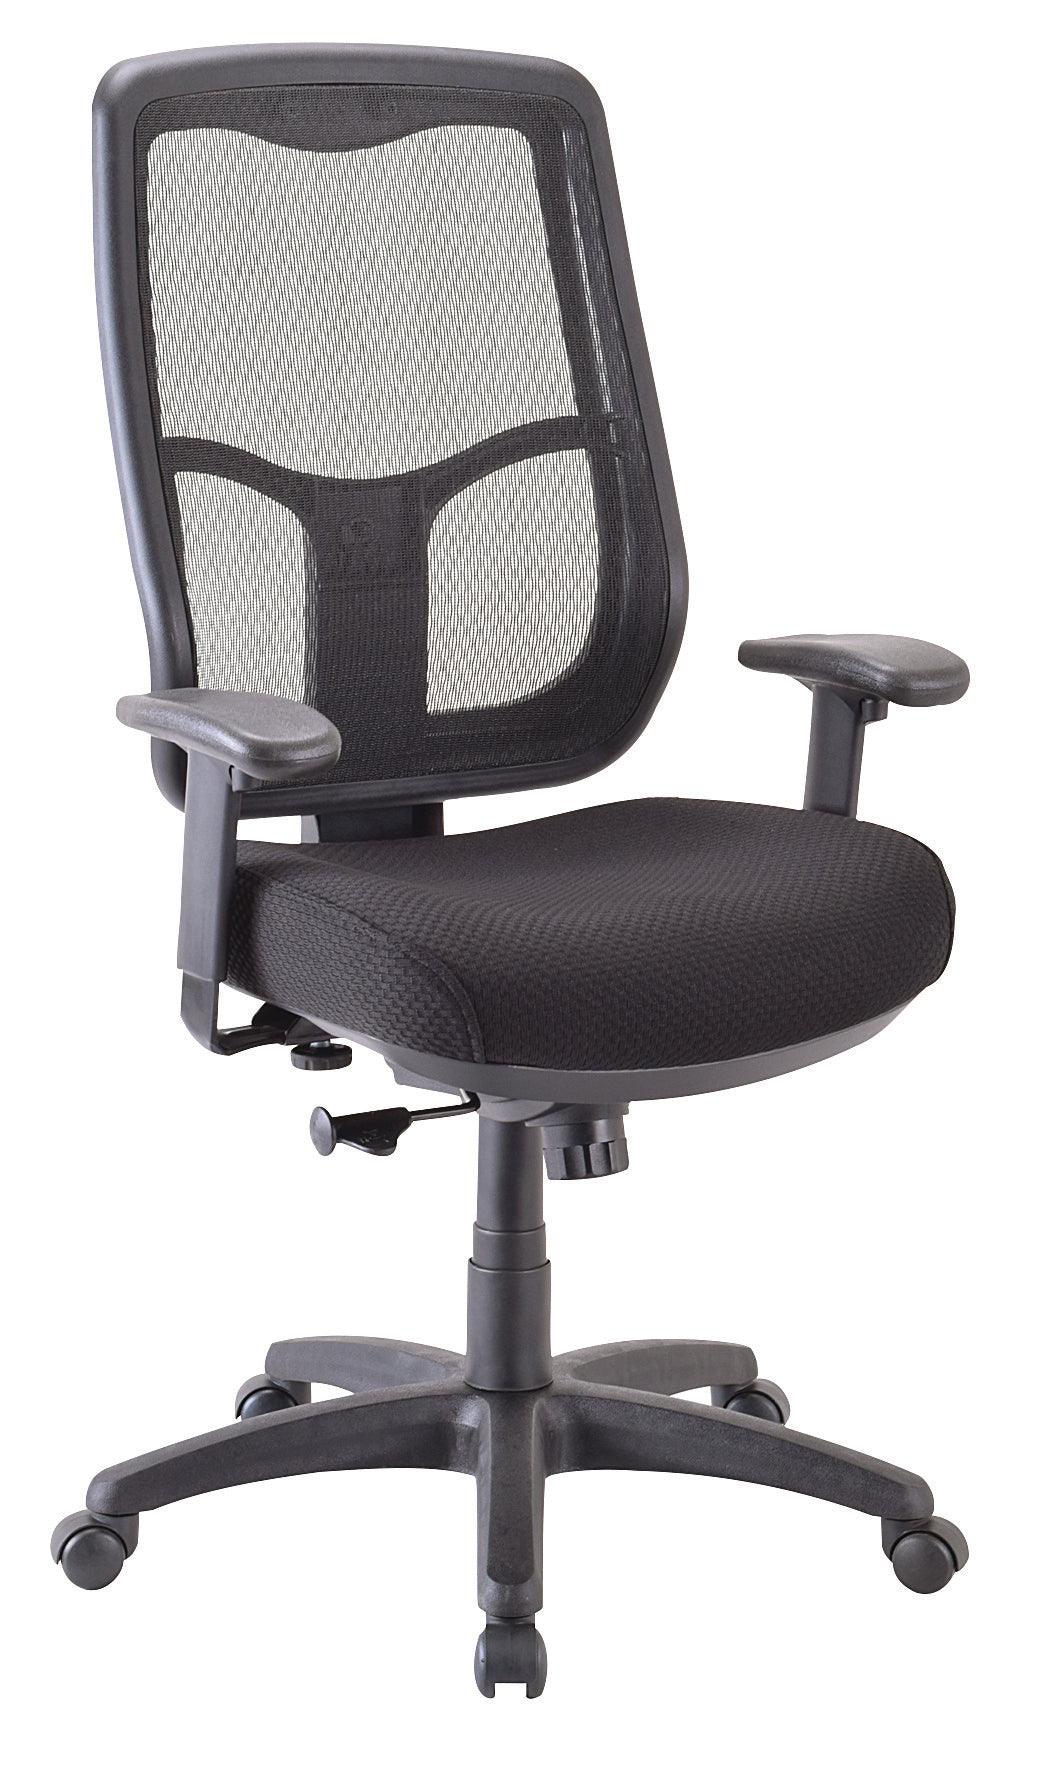 TEMPUR®-944 Office Chair: Everyday Comfort, Elevated - Layton Health